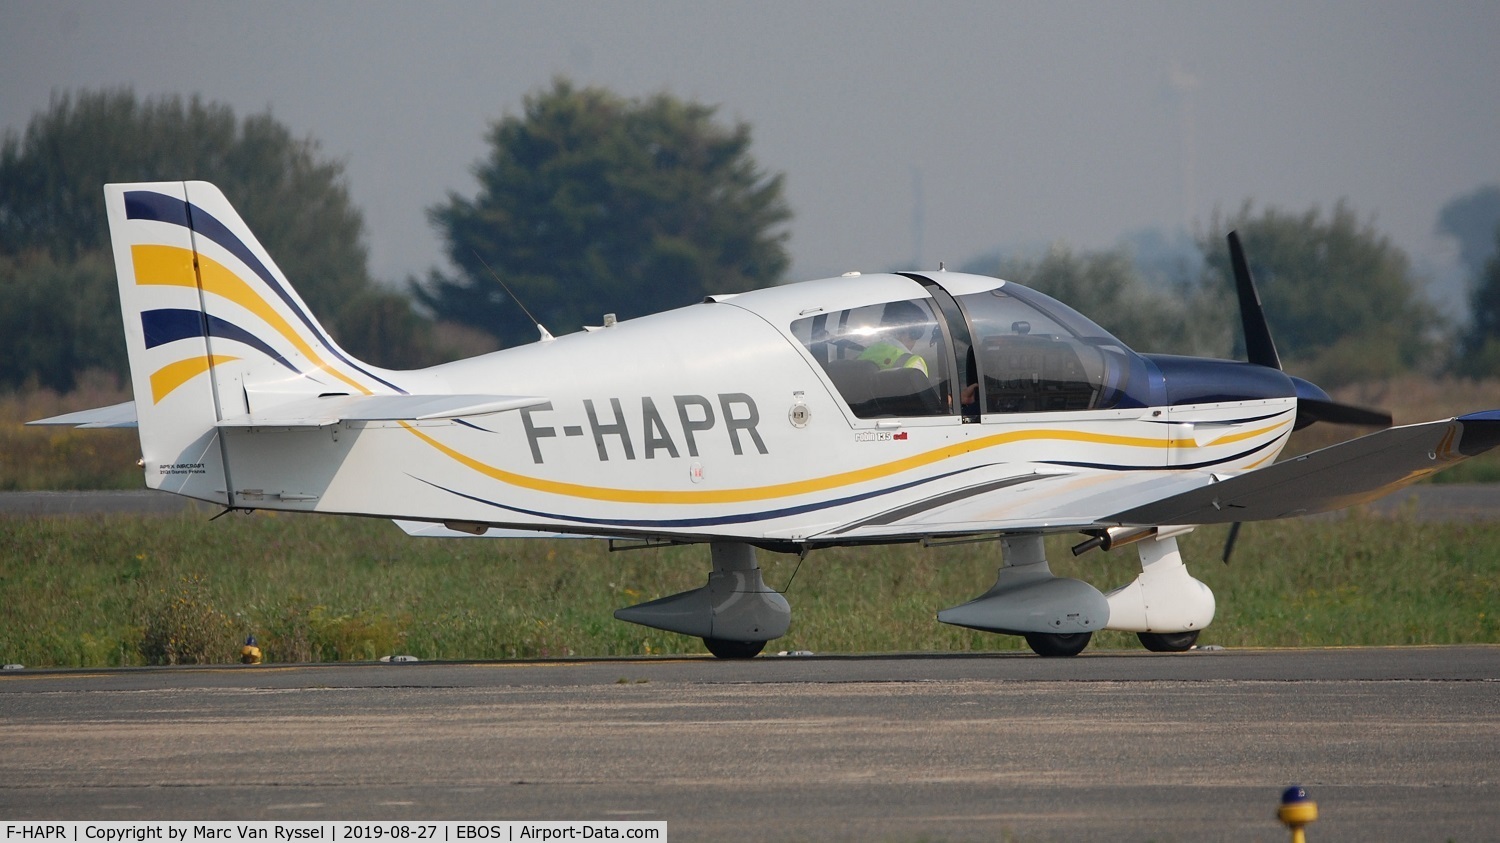 F-HAPR, 2008 Robin DR-400-140B Major Major C/N 2643, Visitor at Ostend airport.